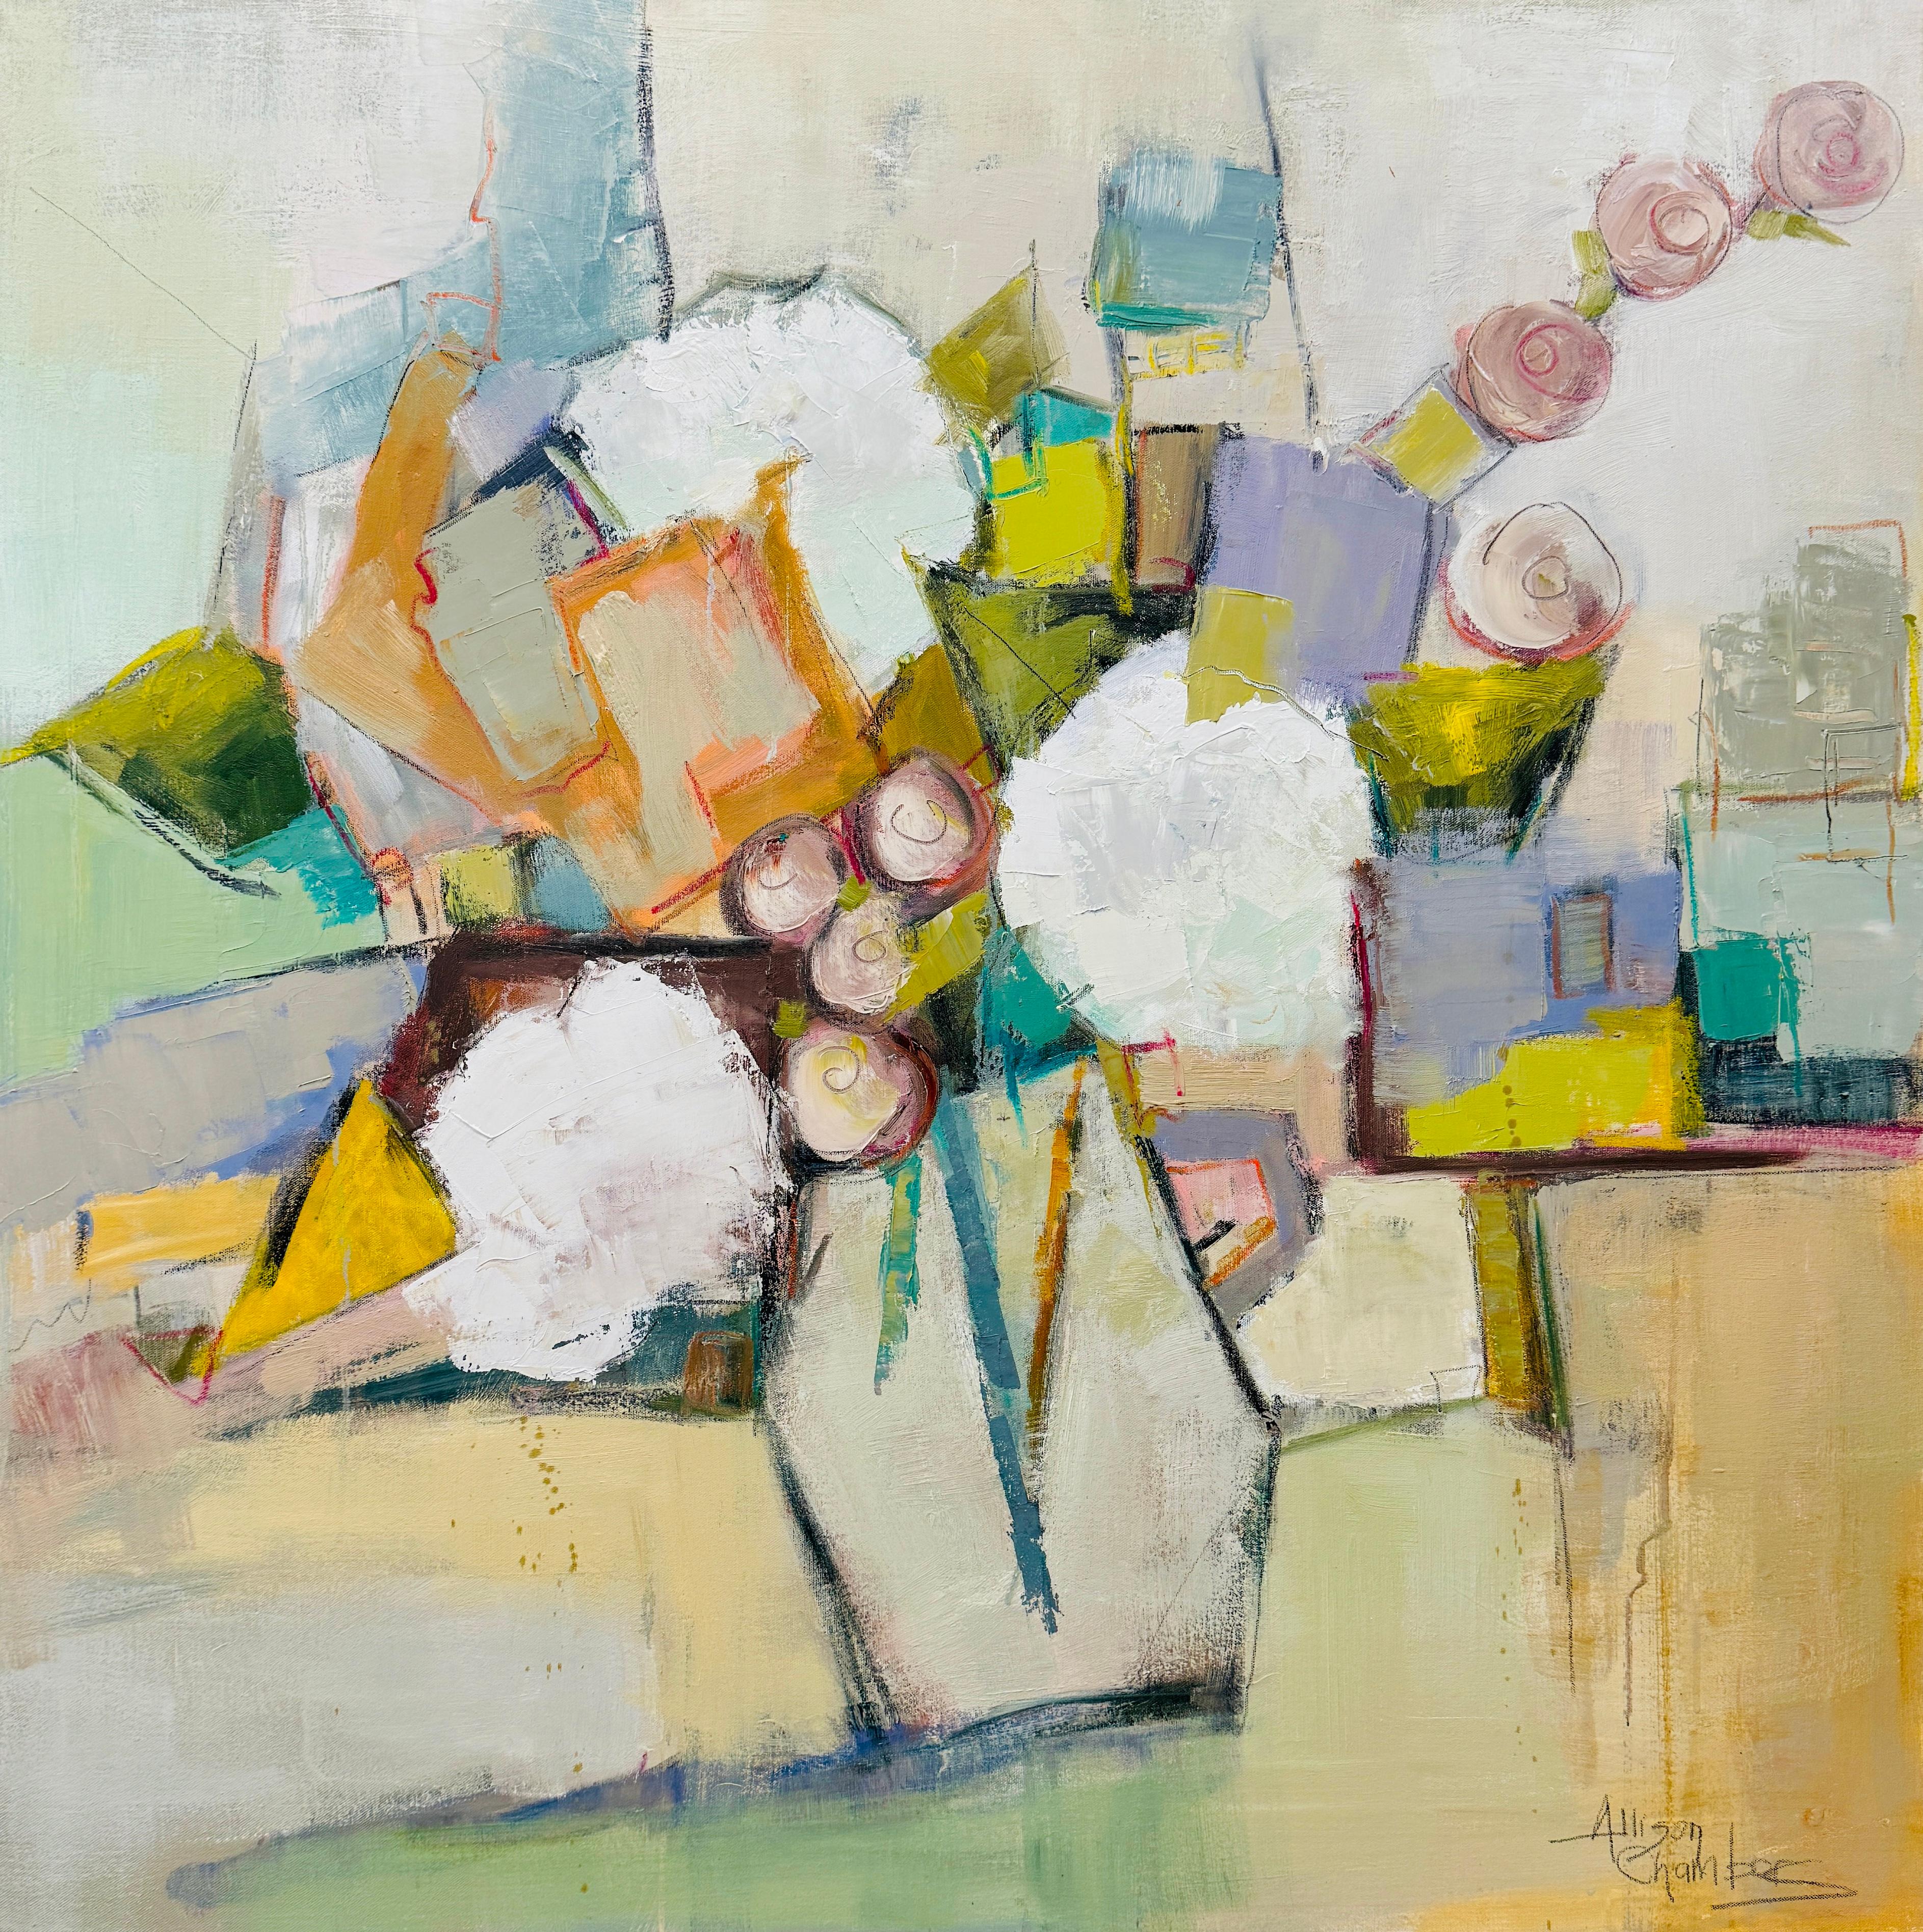 Just Have Fun by Allison Chambers, Oil on Canvas Square Floral